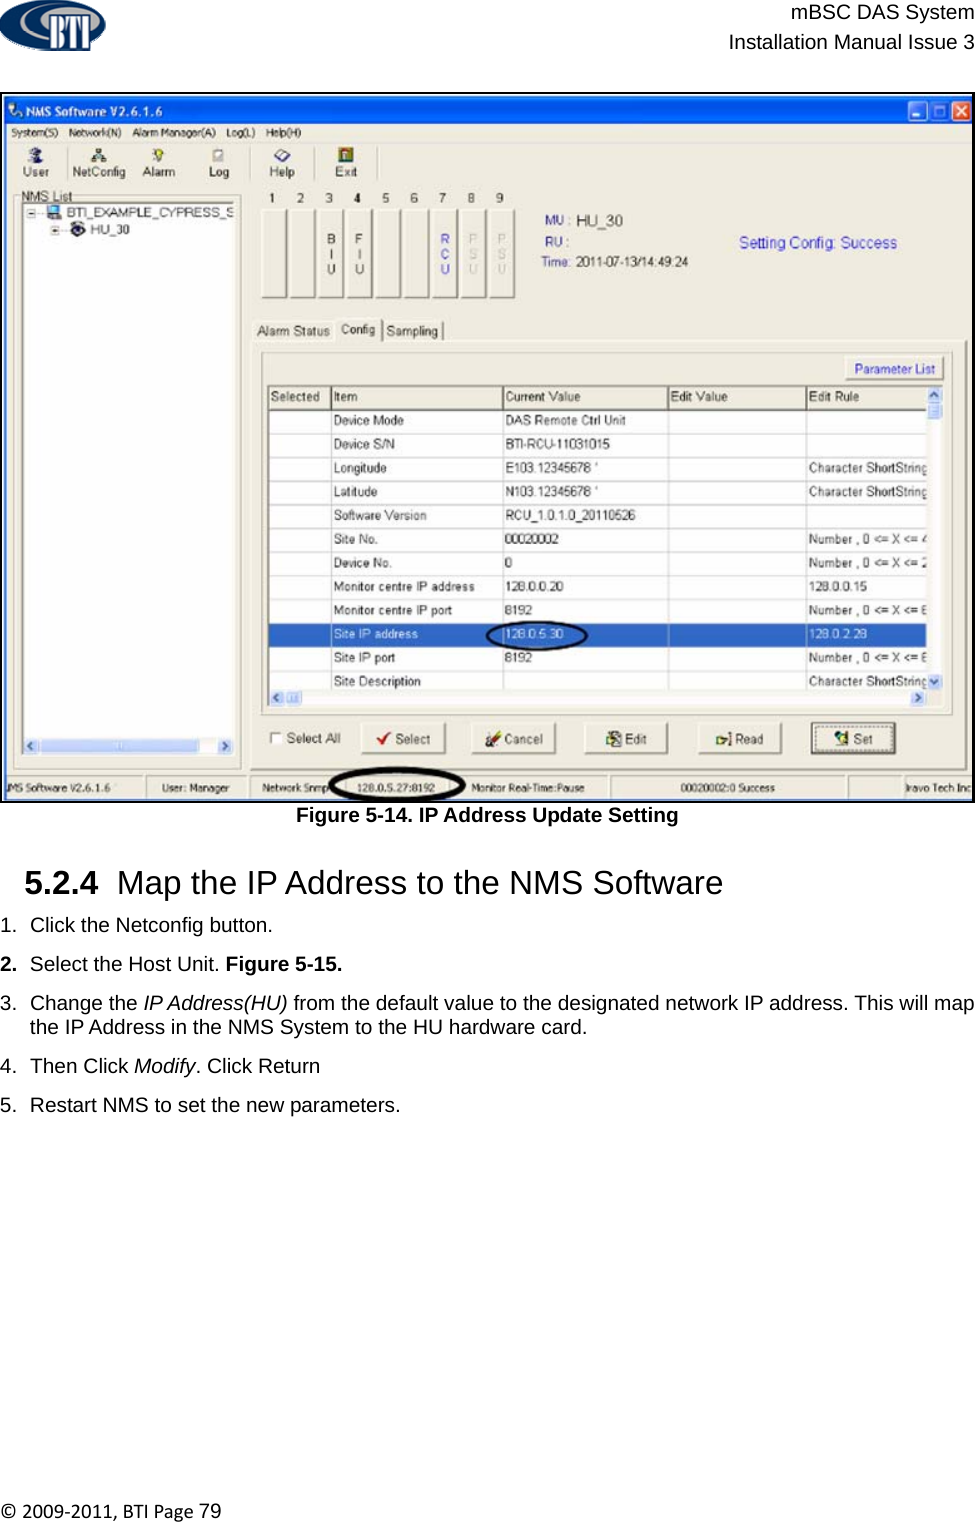                          mBSC DAS System  Installation Manual Issue 3  ©2009‐2011,BTIPage79  Figure 5-14. IP Address Update Setting   5.2.4  Map the IP Address to the NMS Software 1.  Click the Netconfig button. 2.  Select the Host Unit. Figure 5-15. 3. Change the IP Address(HU) from the default value to the designated network IP address. This will map the IP Address in the NMS System to the HU hardware card. 4. Then Click Modify. Click Return 5.  Restart NMS to set the new parameters.   